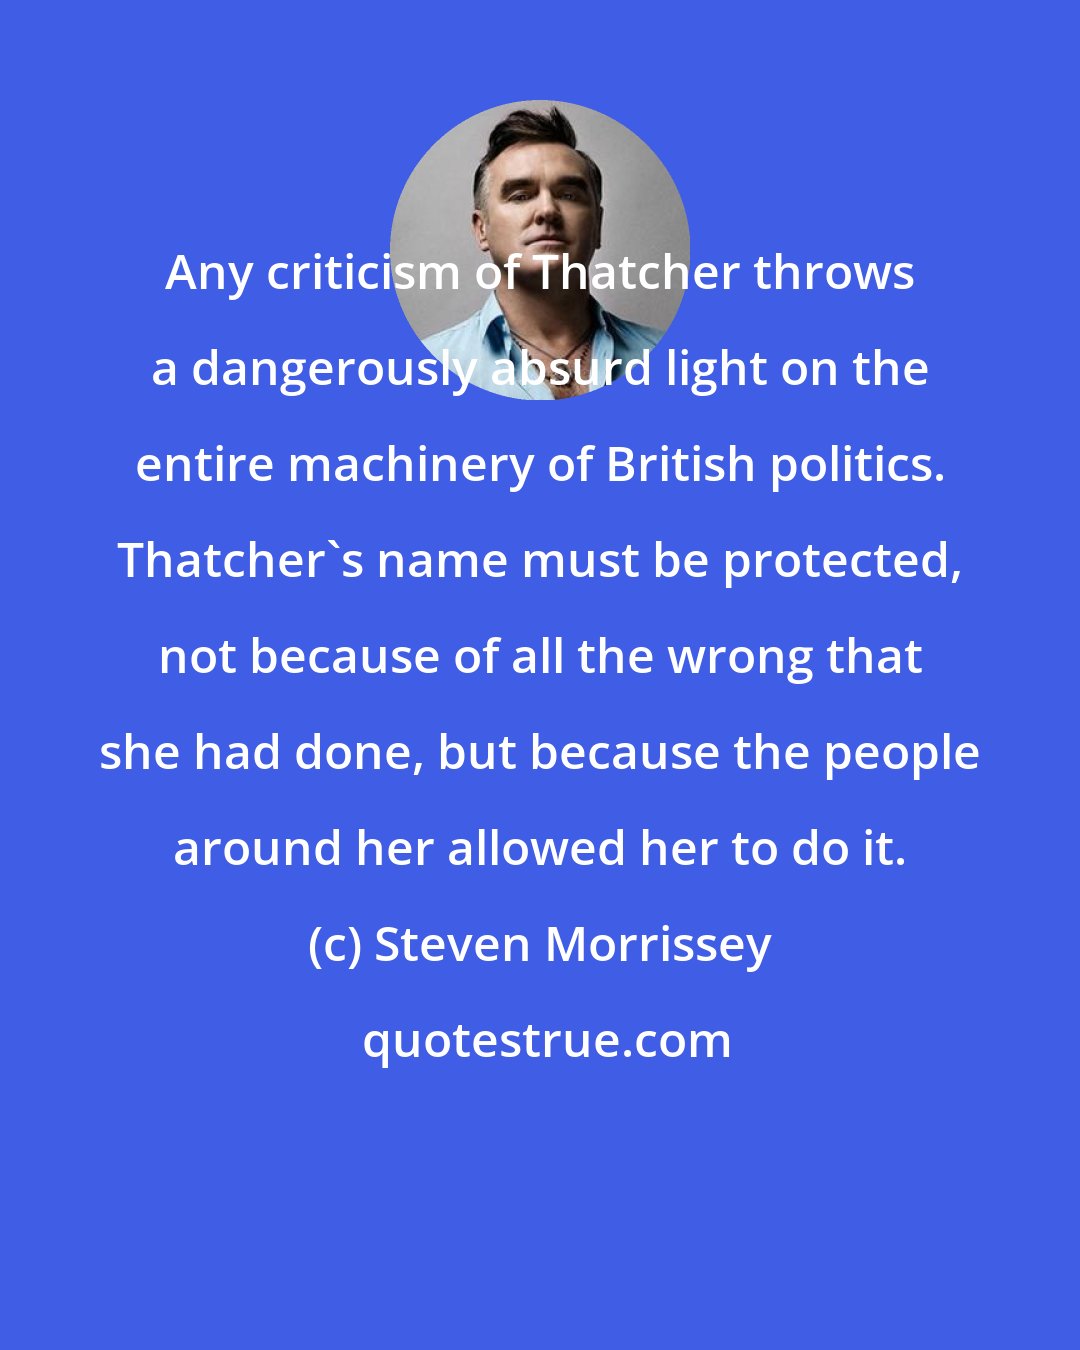 Steven Morrissey: Any criticism of Thatcher throws a dangerously absurd light on the entire machinery of British politics. Thatcher's name must be protected, not because of all the wrong that she had done, but because the people around her allowed her to do it.